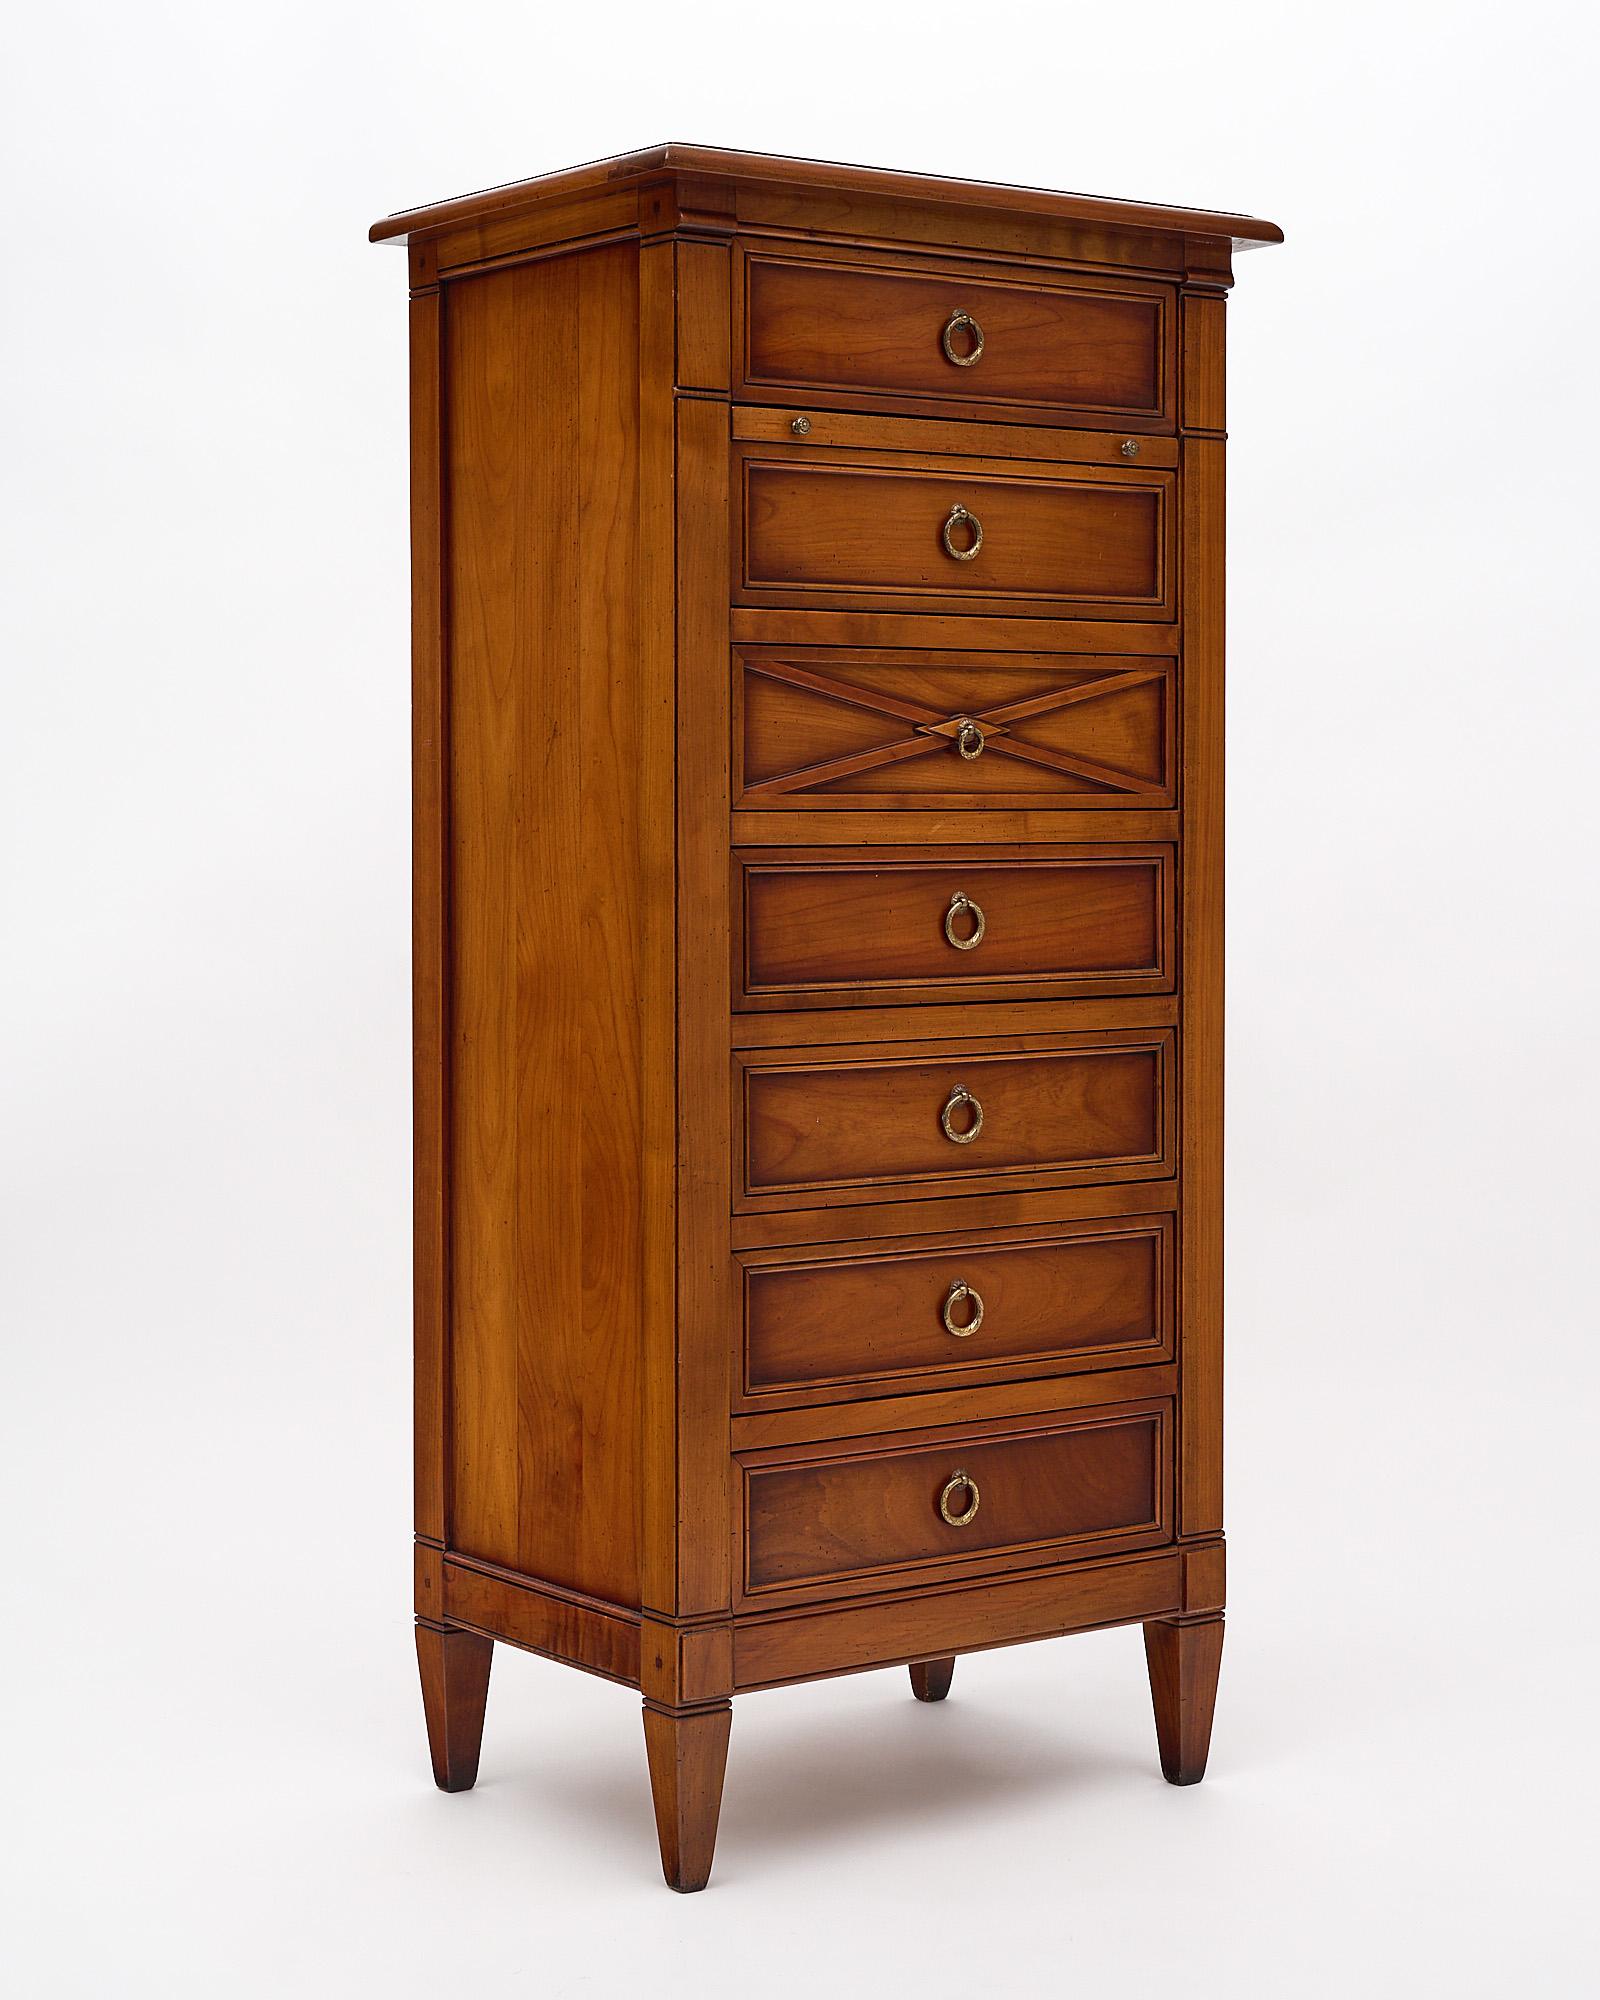 Semainier with seven dovetailed drawers (semaine means week in French) made of hand-carved cherry wood with tapered legs. This cabinet features an additional pull out shelf.